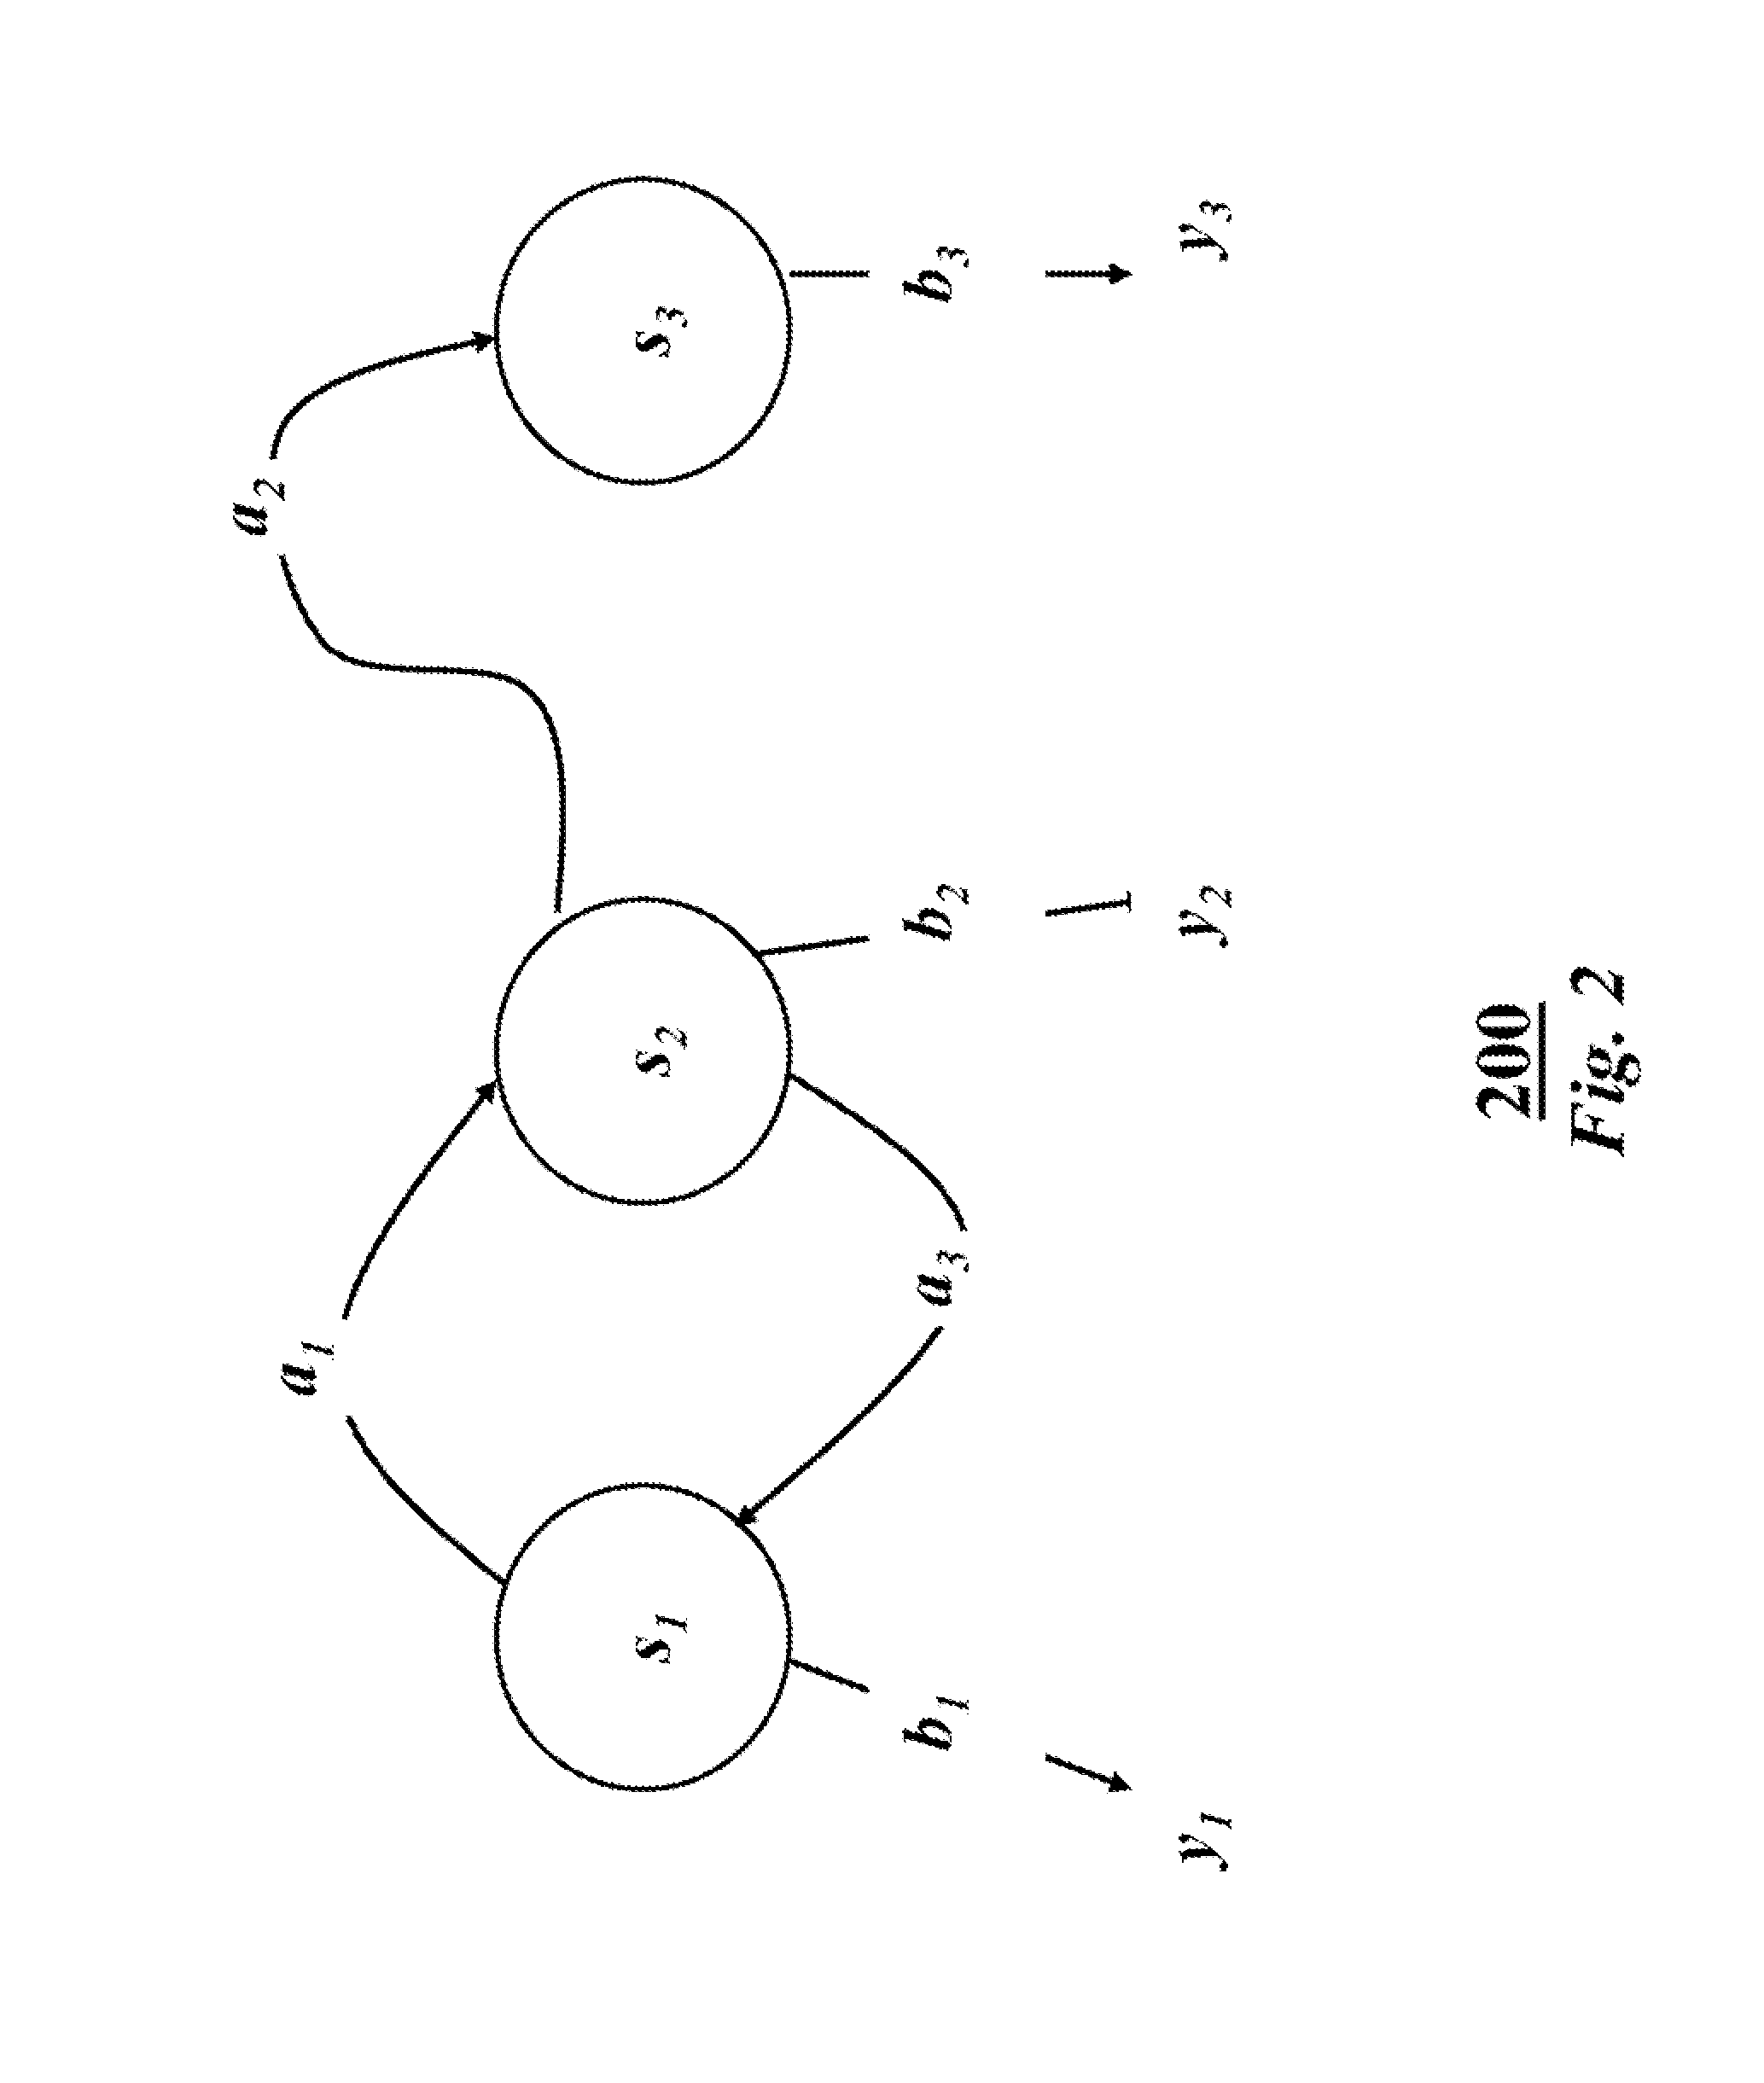 System and Method for Recognizing Speech Securely